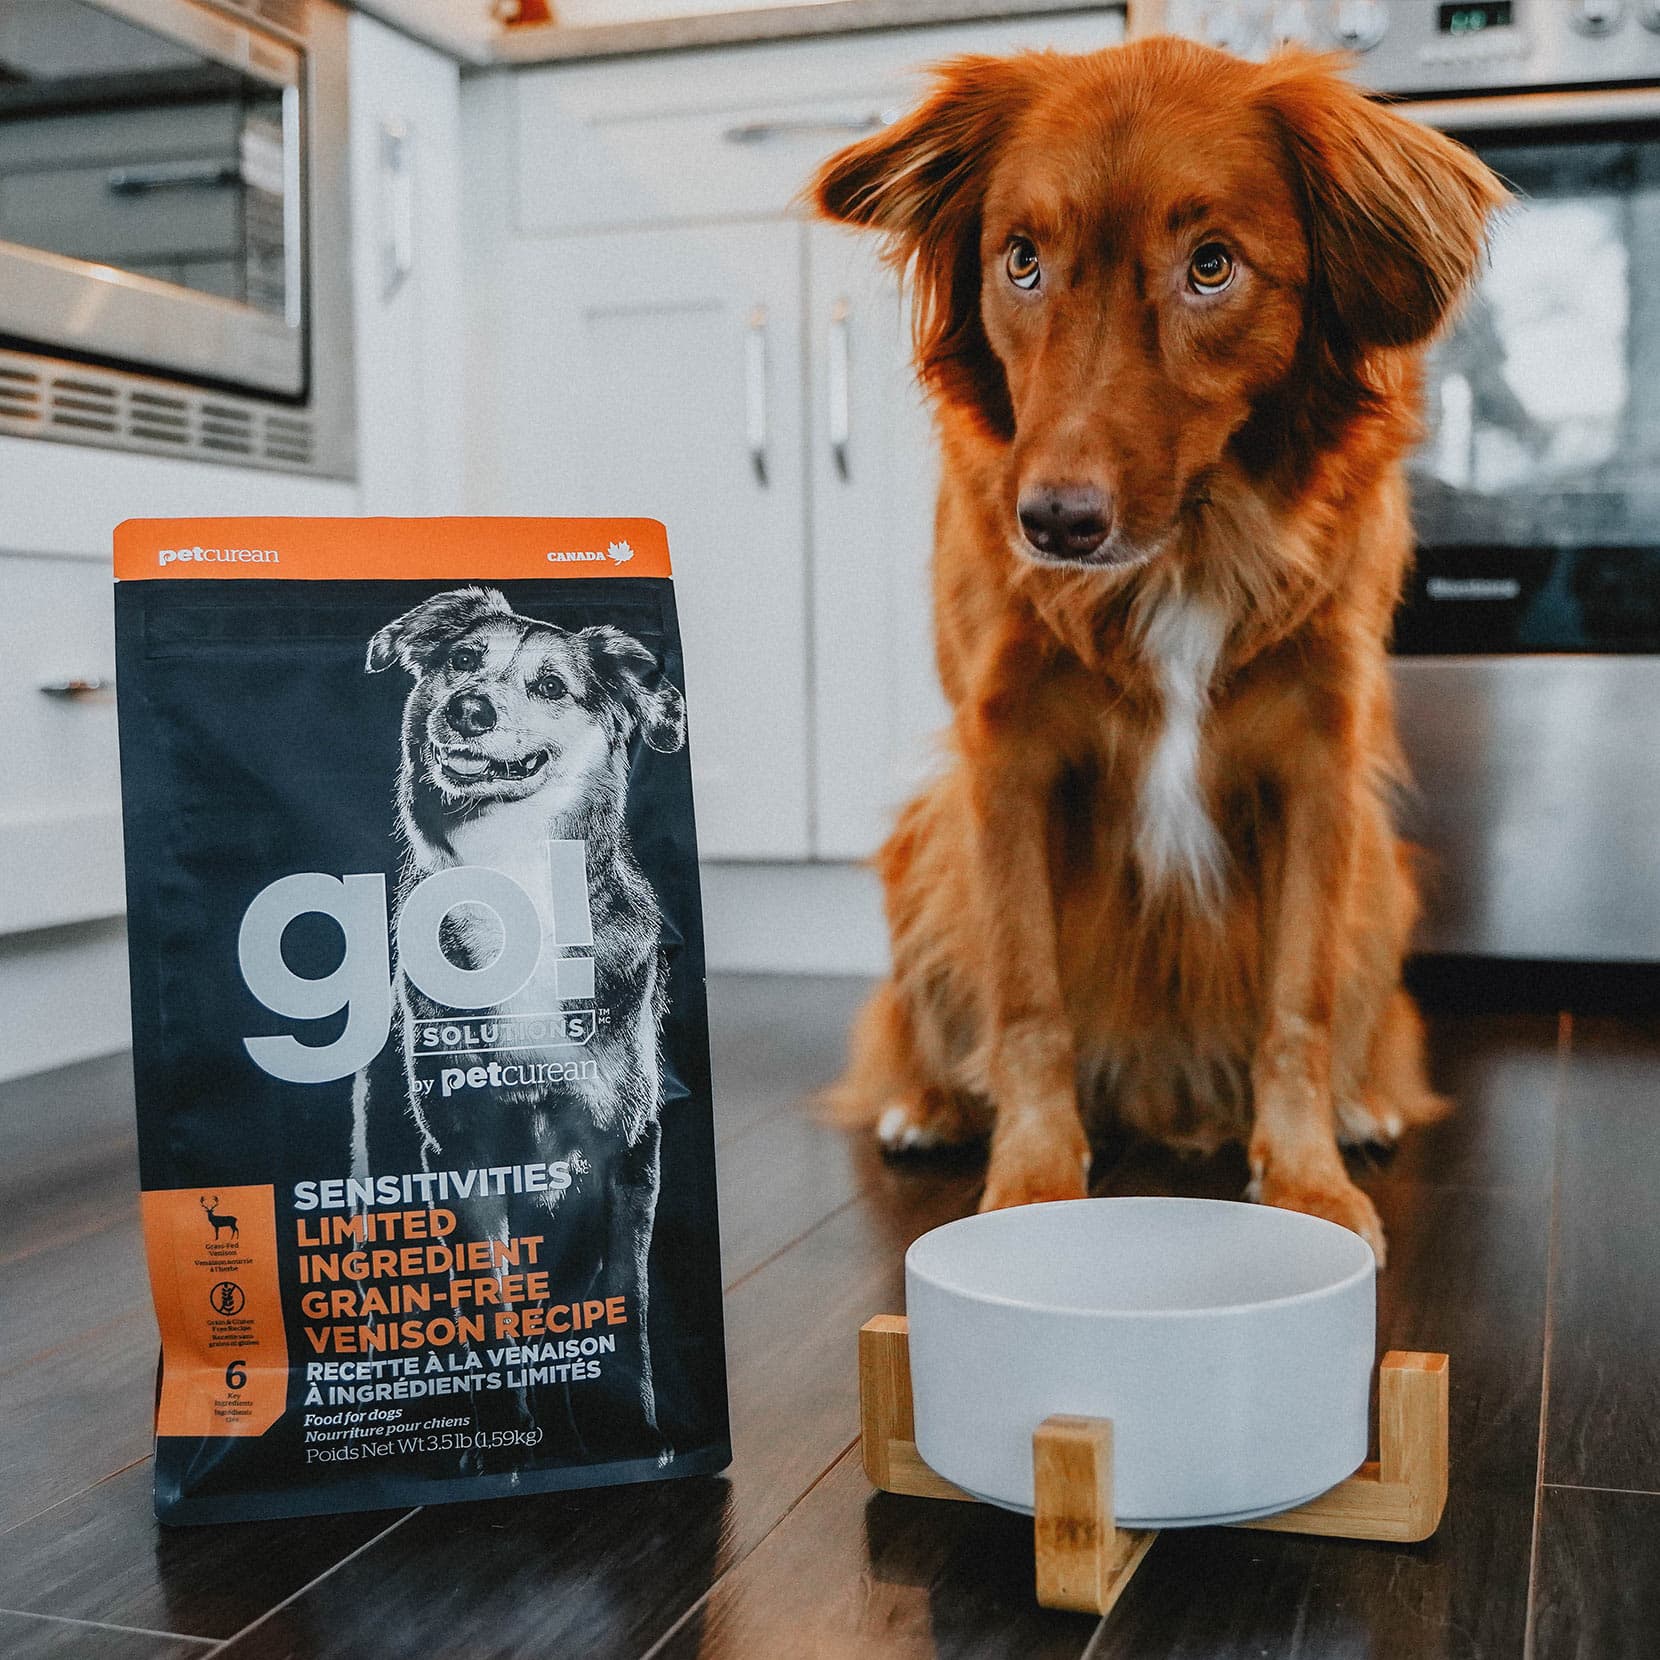 GO! SENSITIVITIES Limited Ingredient Grain Free Venison Recipe for Dogs